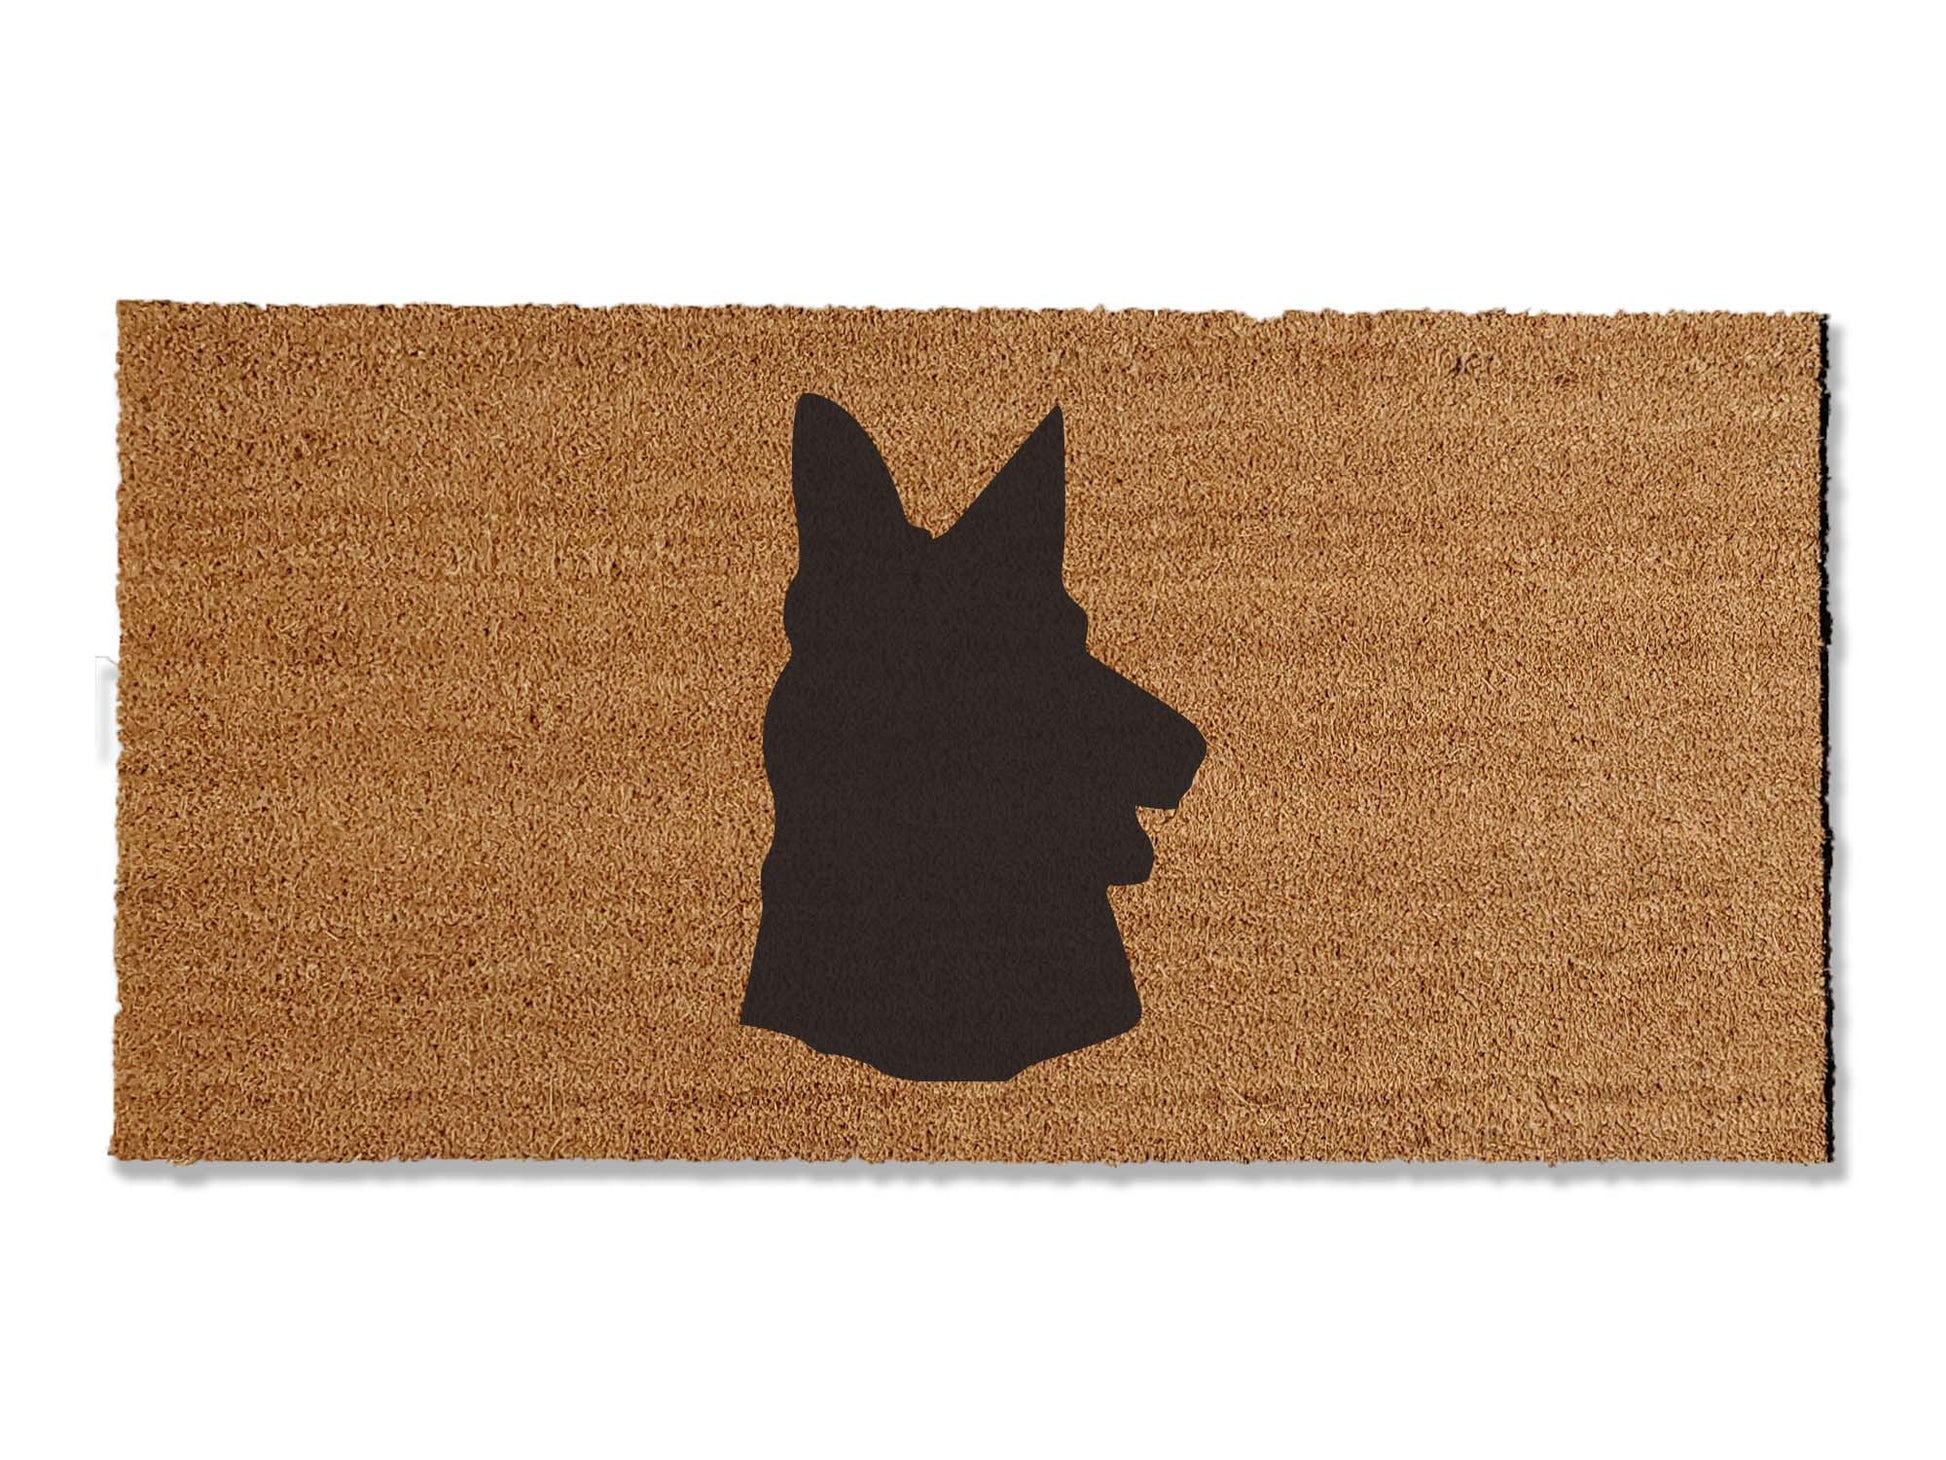 Welcome guests with our coir welcome doormat, featuring a charming German Shepherd design. Available in multiple sizes, this is the perfect gift for German Shepherd lovers, adding a touch of canine charm that effortlessly spruces up your entryway.